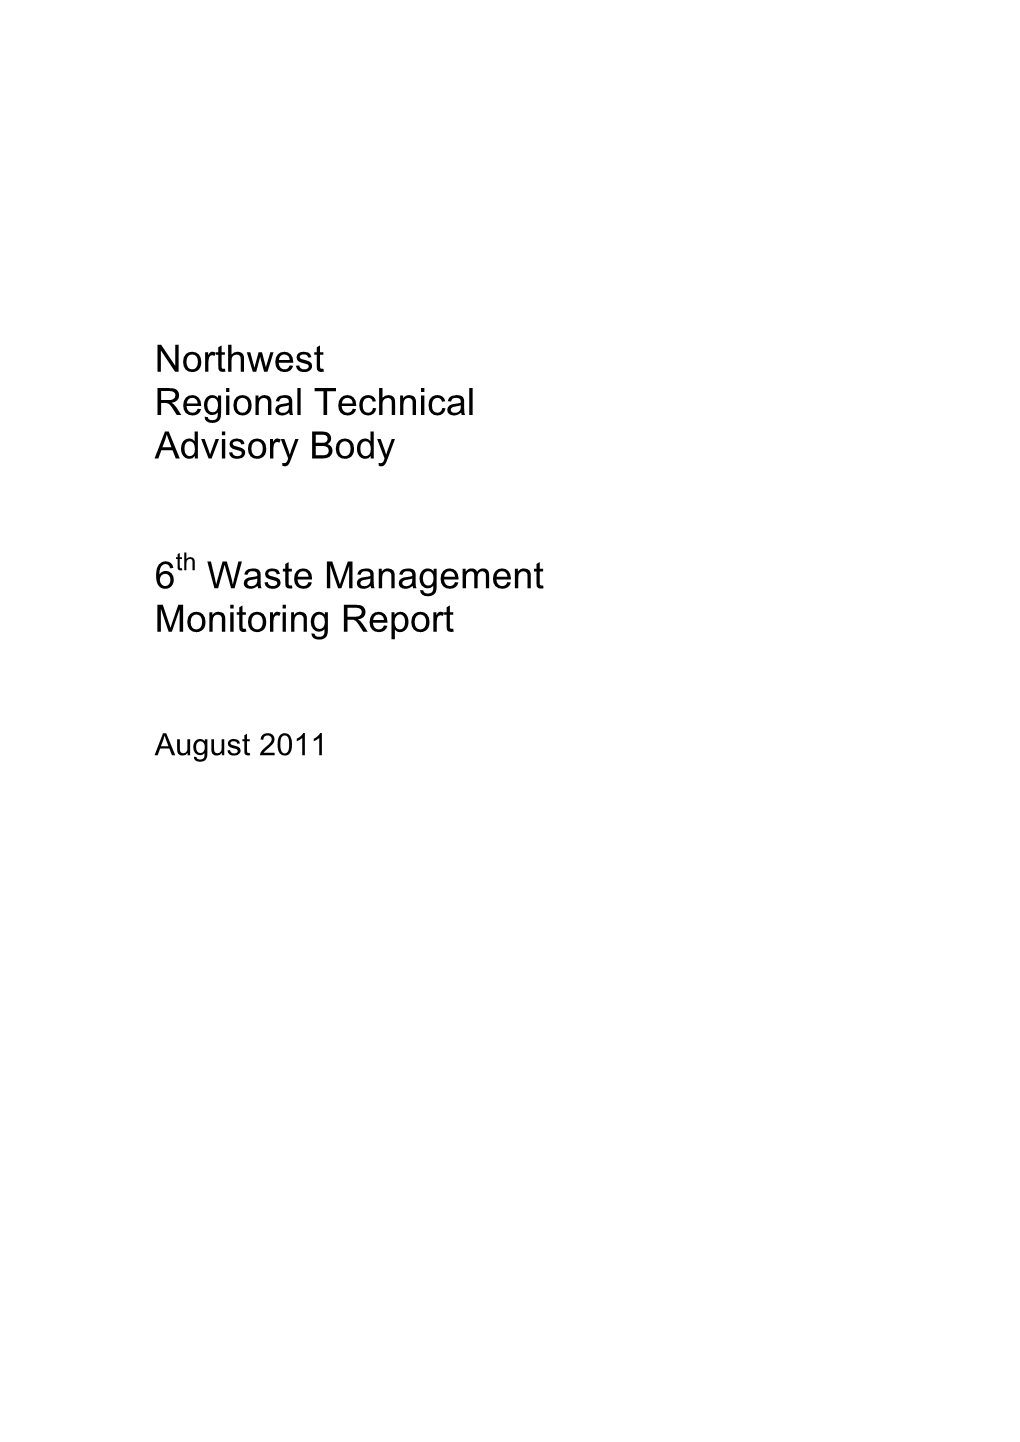 LD189 NW RTAB 6Th Waste Report Aug 2011